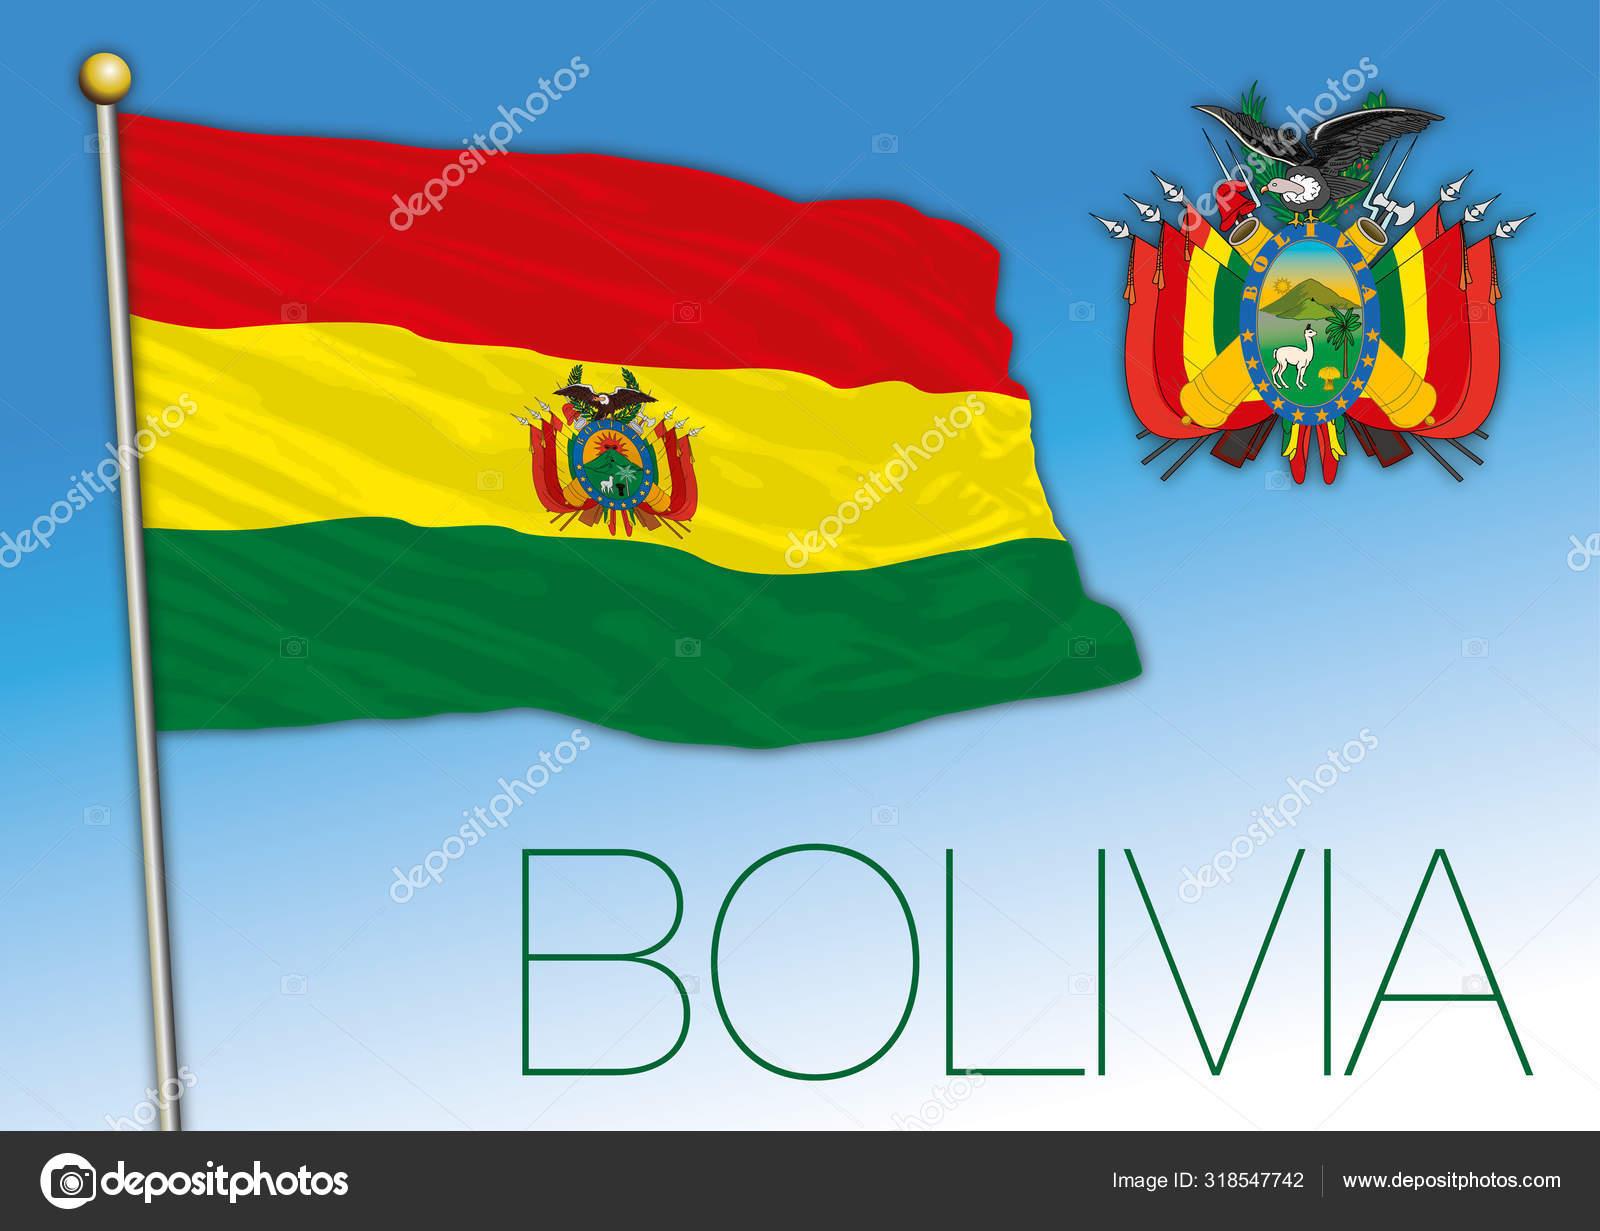 Download Bolivia Official Flag Coat Arms Vector Illustration South America ⬇ Vector Image by © frizio ...